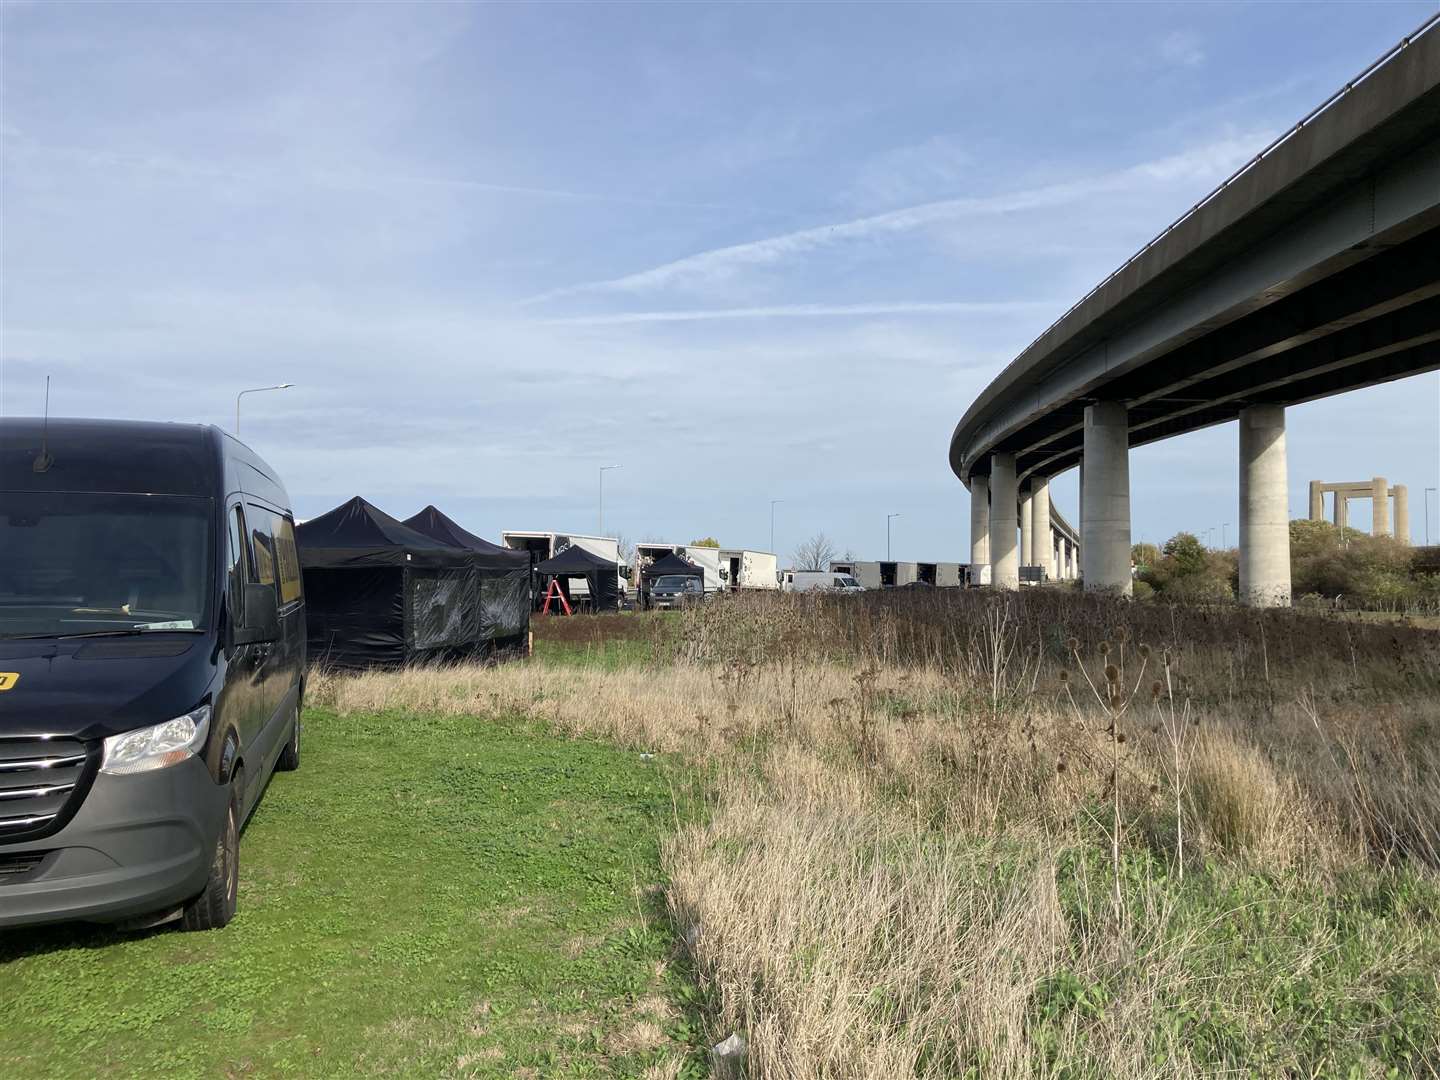 Tents for filming have been set up at the bridge which connects Sheppey and Sittingbourne. Picture: John Nurden